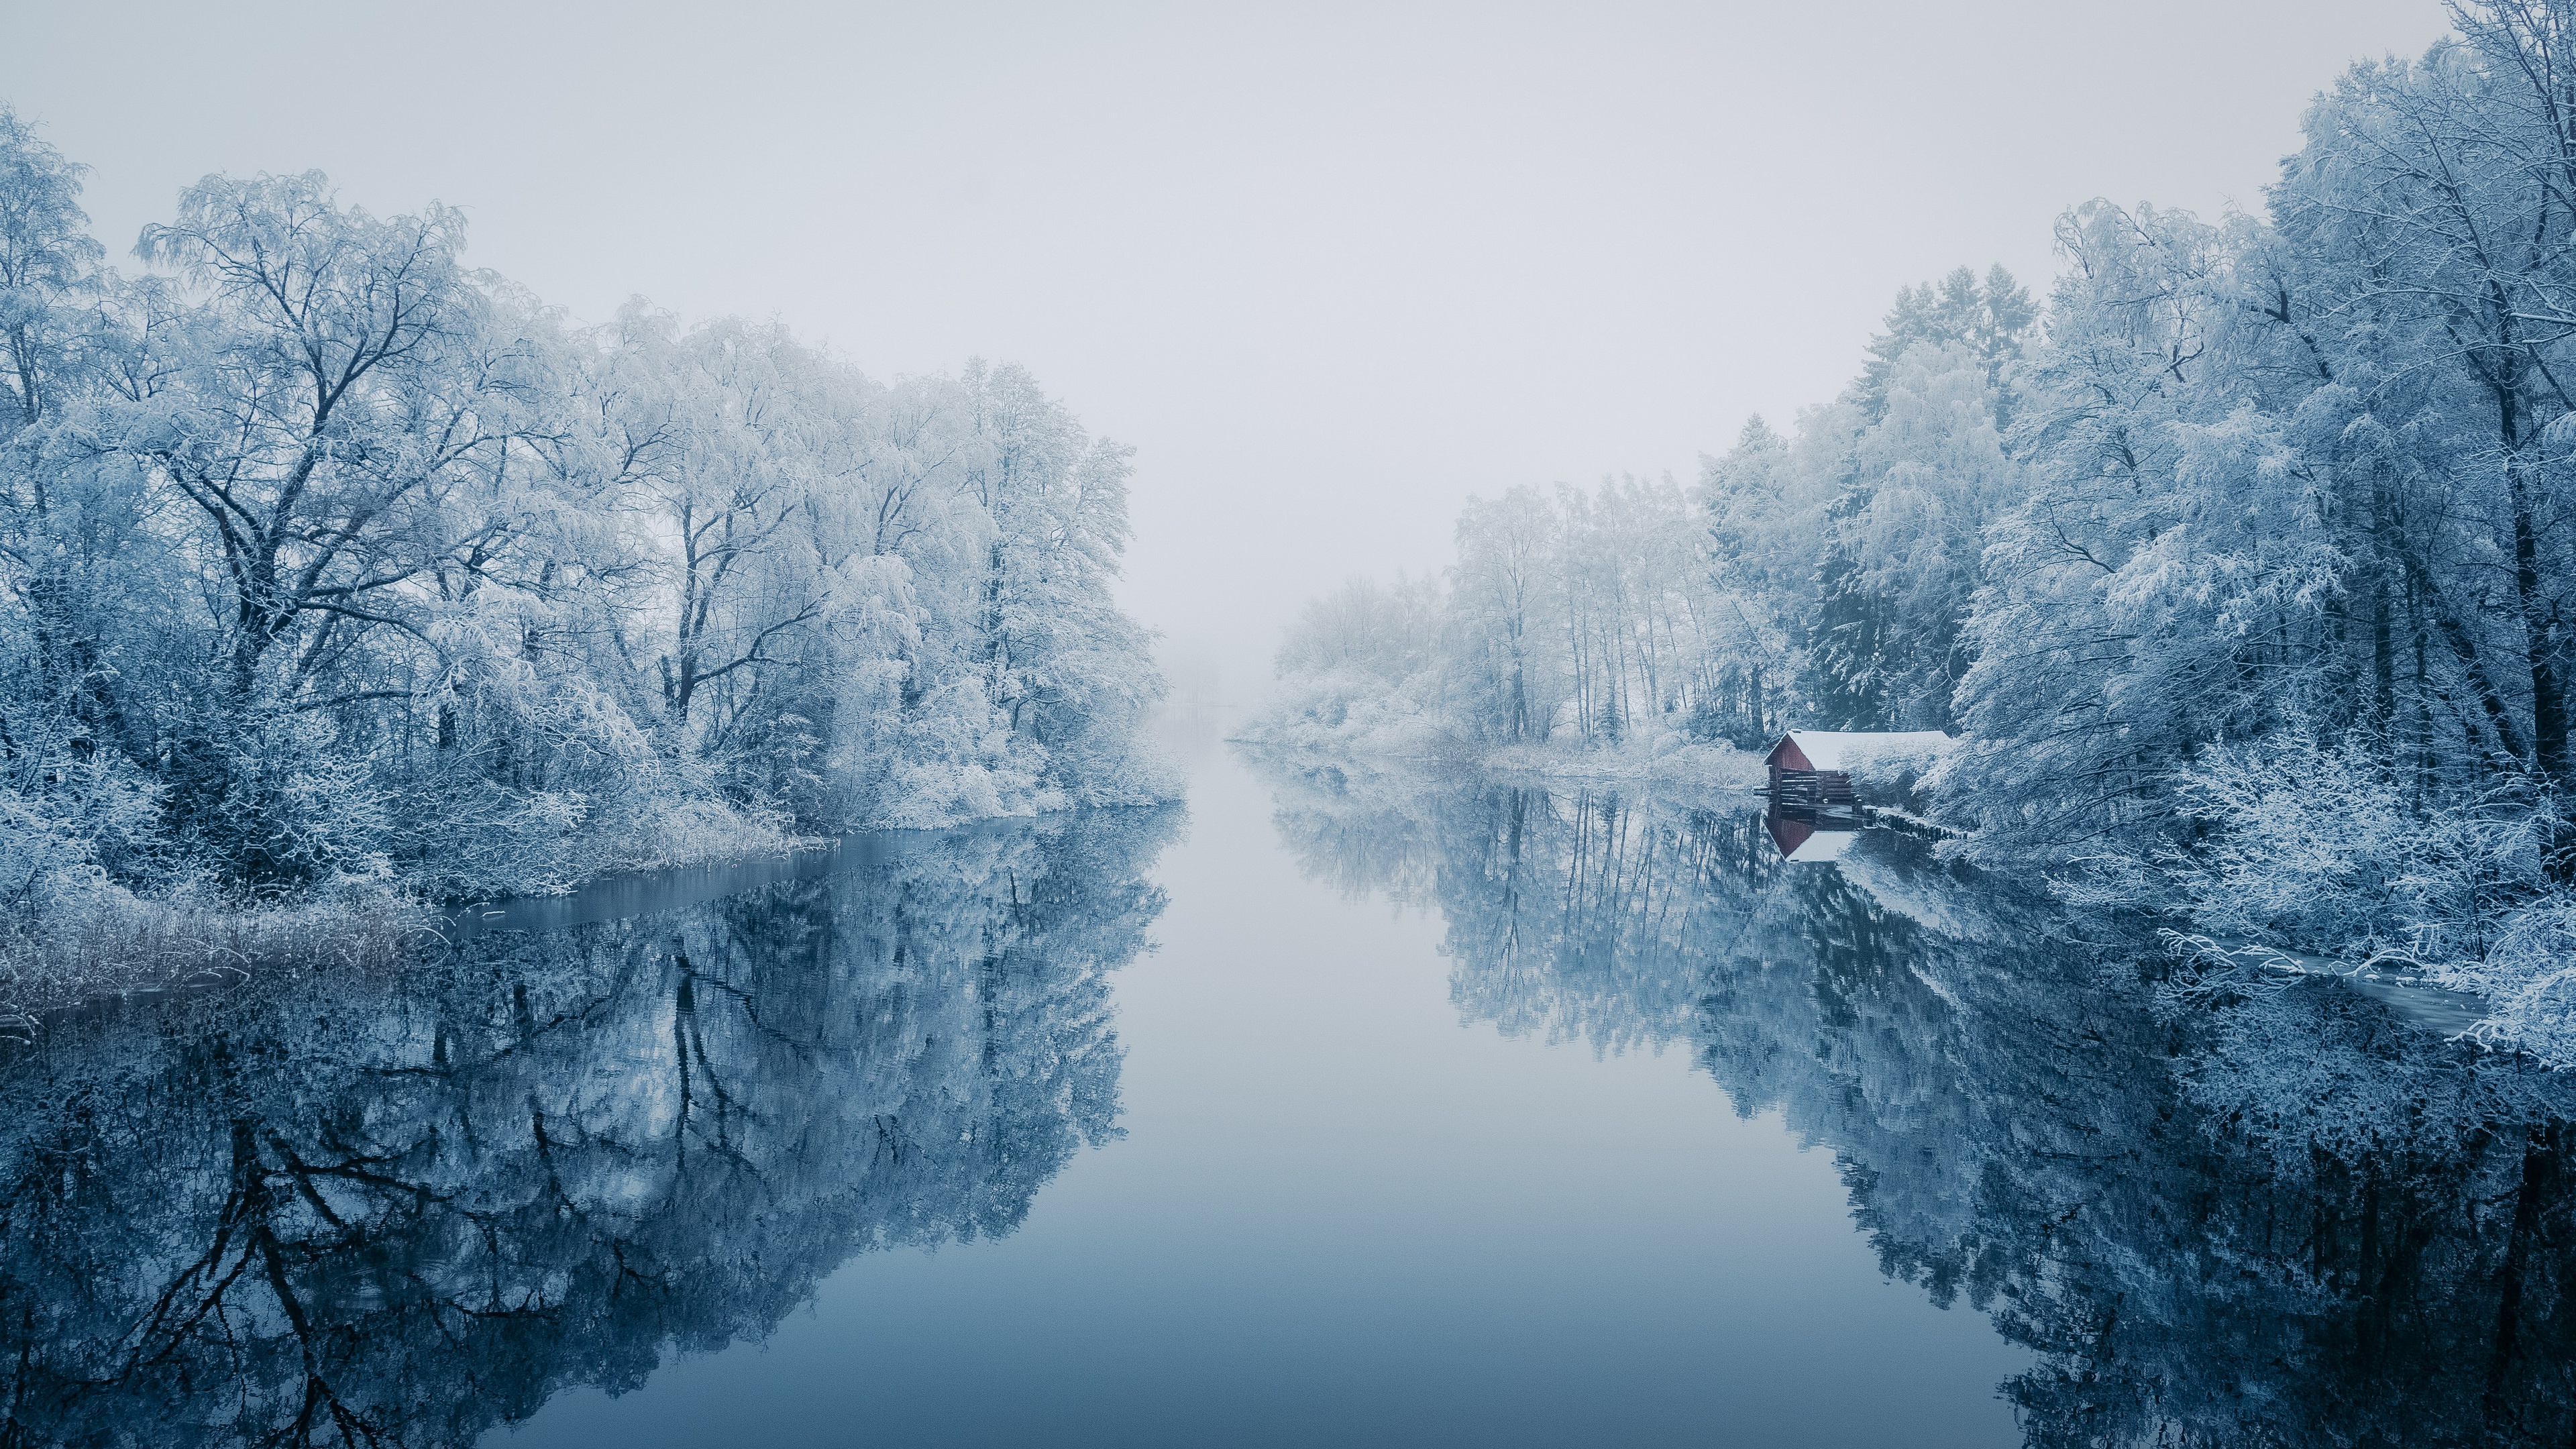 General 3840x2160 nature winter water reflection trees snow cold outdoors river